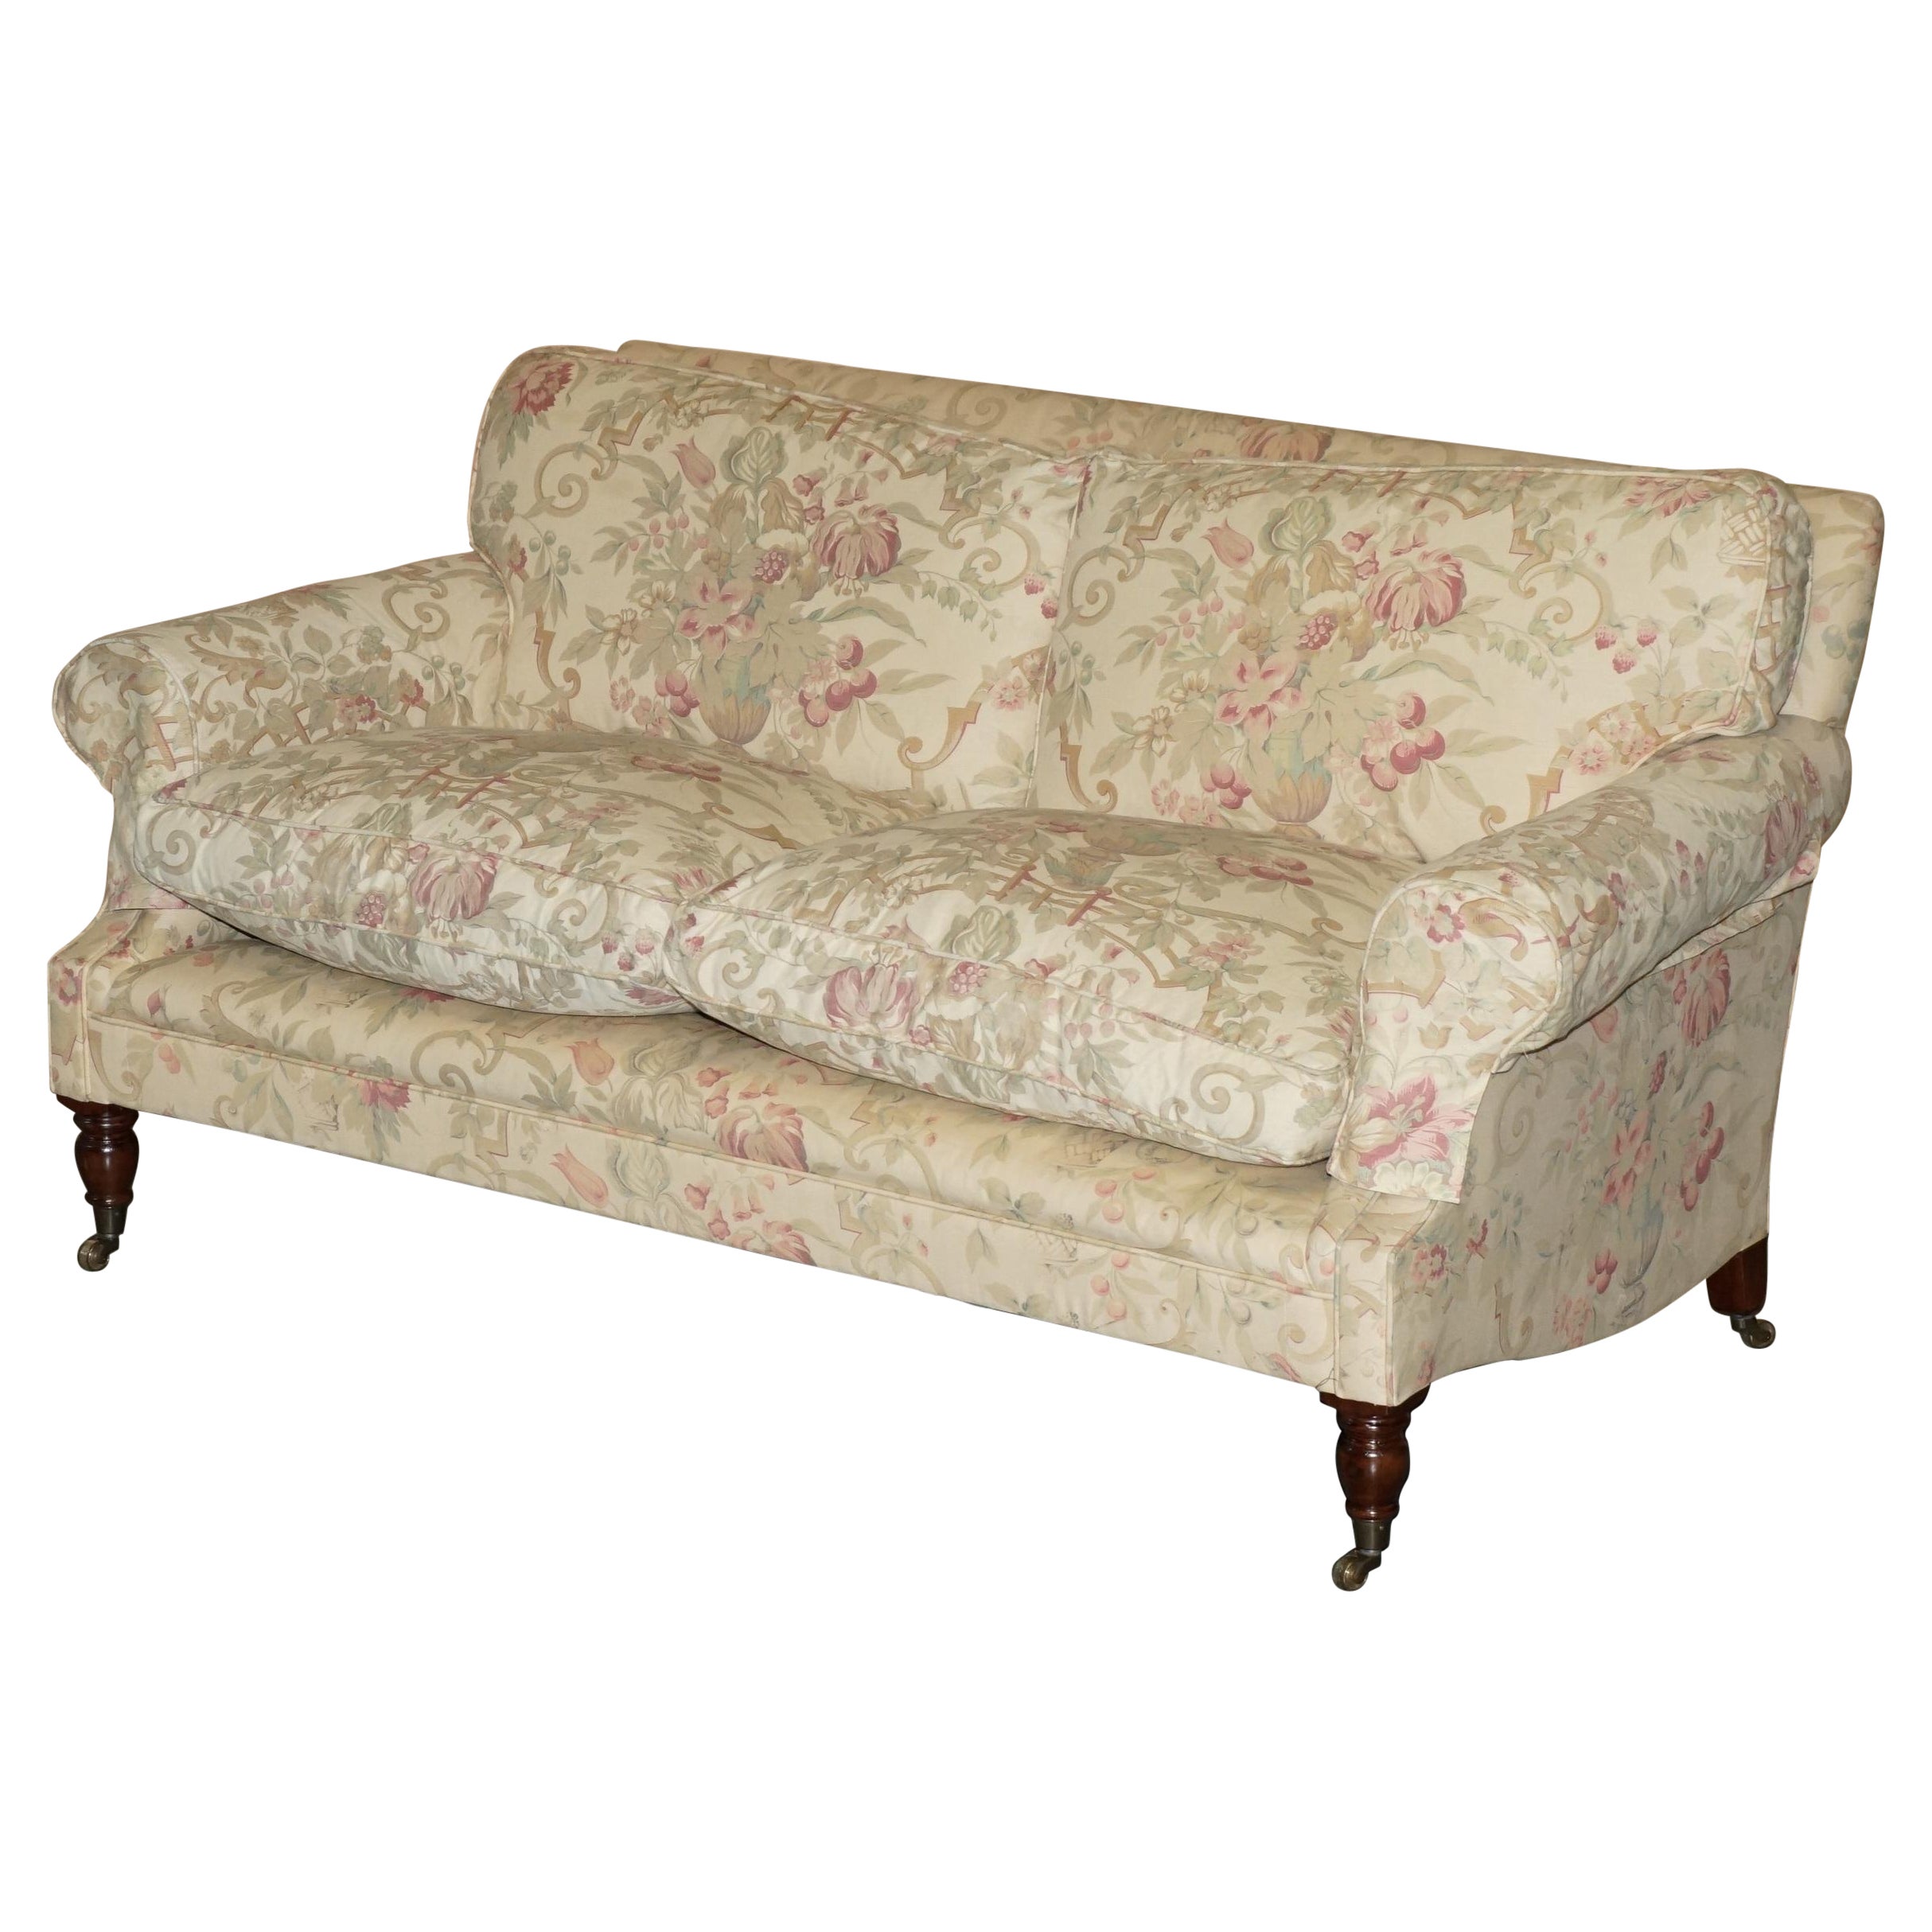 GEORGE SMITH CHELSEA TWO SEAT SOFA IN ORIGINAL UPHOLSTERY PART SUiTE